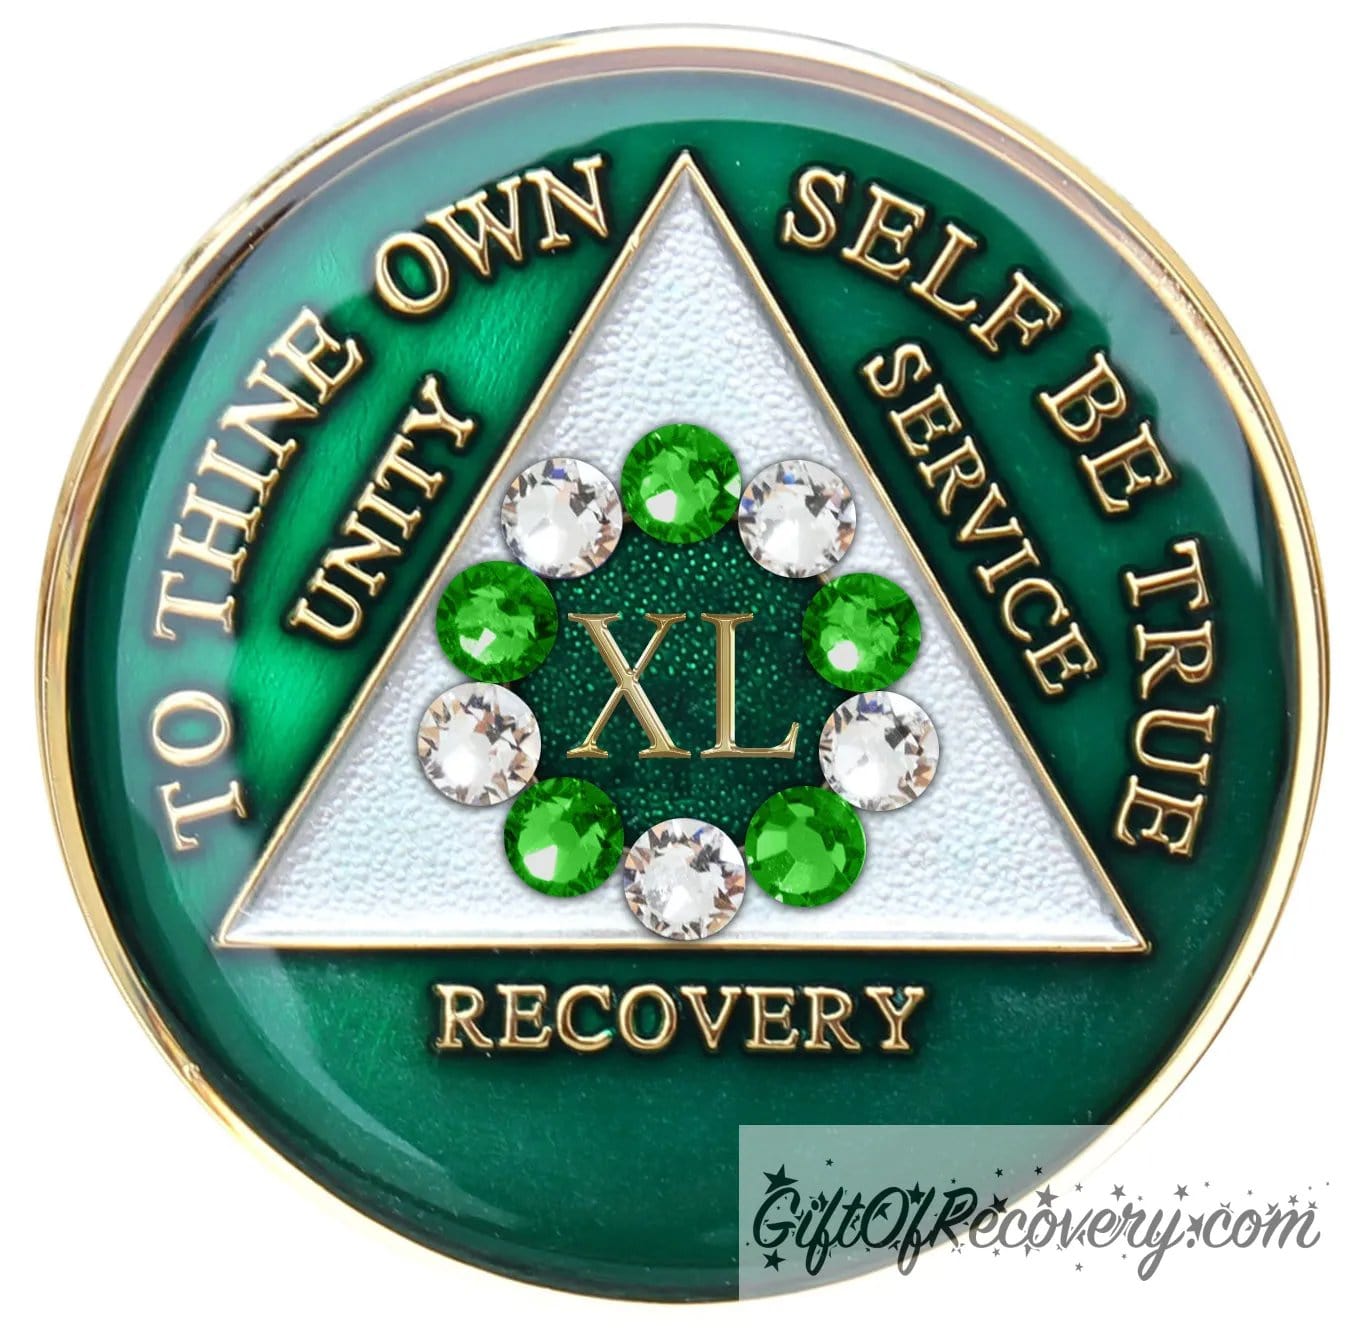 40 year emerald green AA medallion with the 10th step in emphasis in the center, 5 emerald green genuine crystals and 5 clear genuine crystals, inside the triangle is pearl white, while the circle is sparkle green. To thine own self be true, unity, service, recovery, and the roman numeral 1, are 14k gold and sealed with resin for a glossy finish.